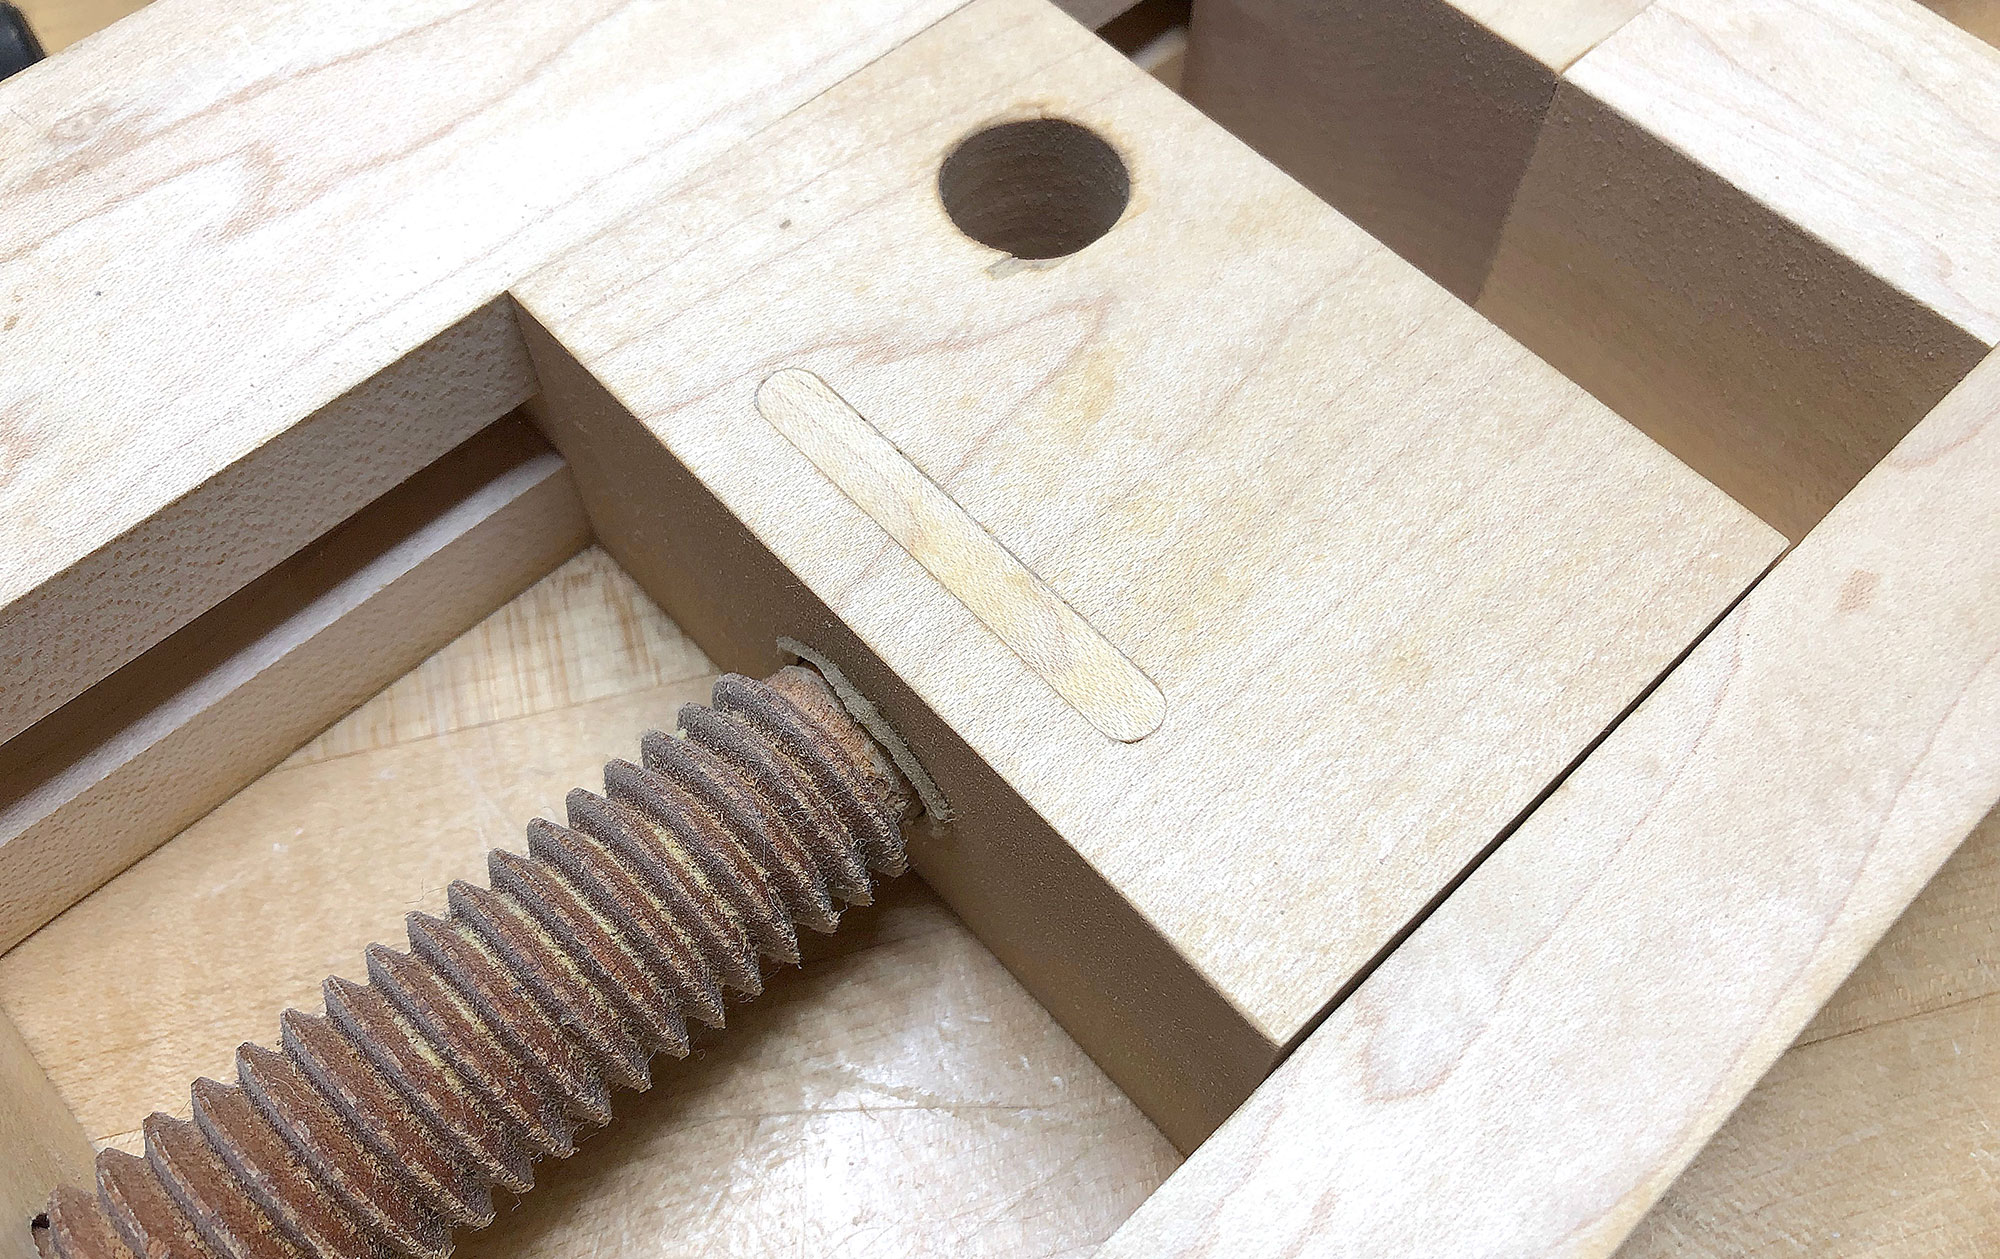 Stub tenon with pining card inserted